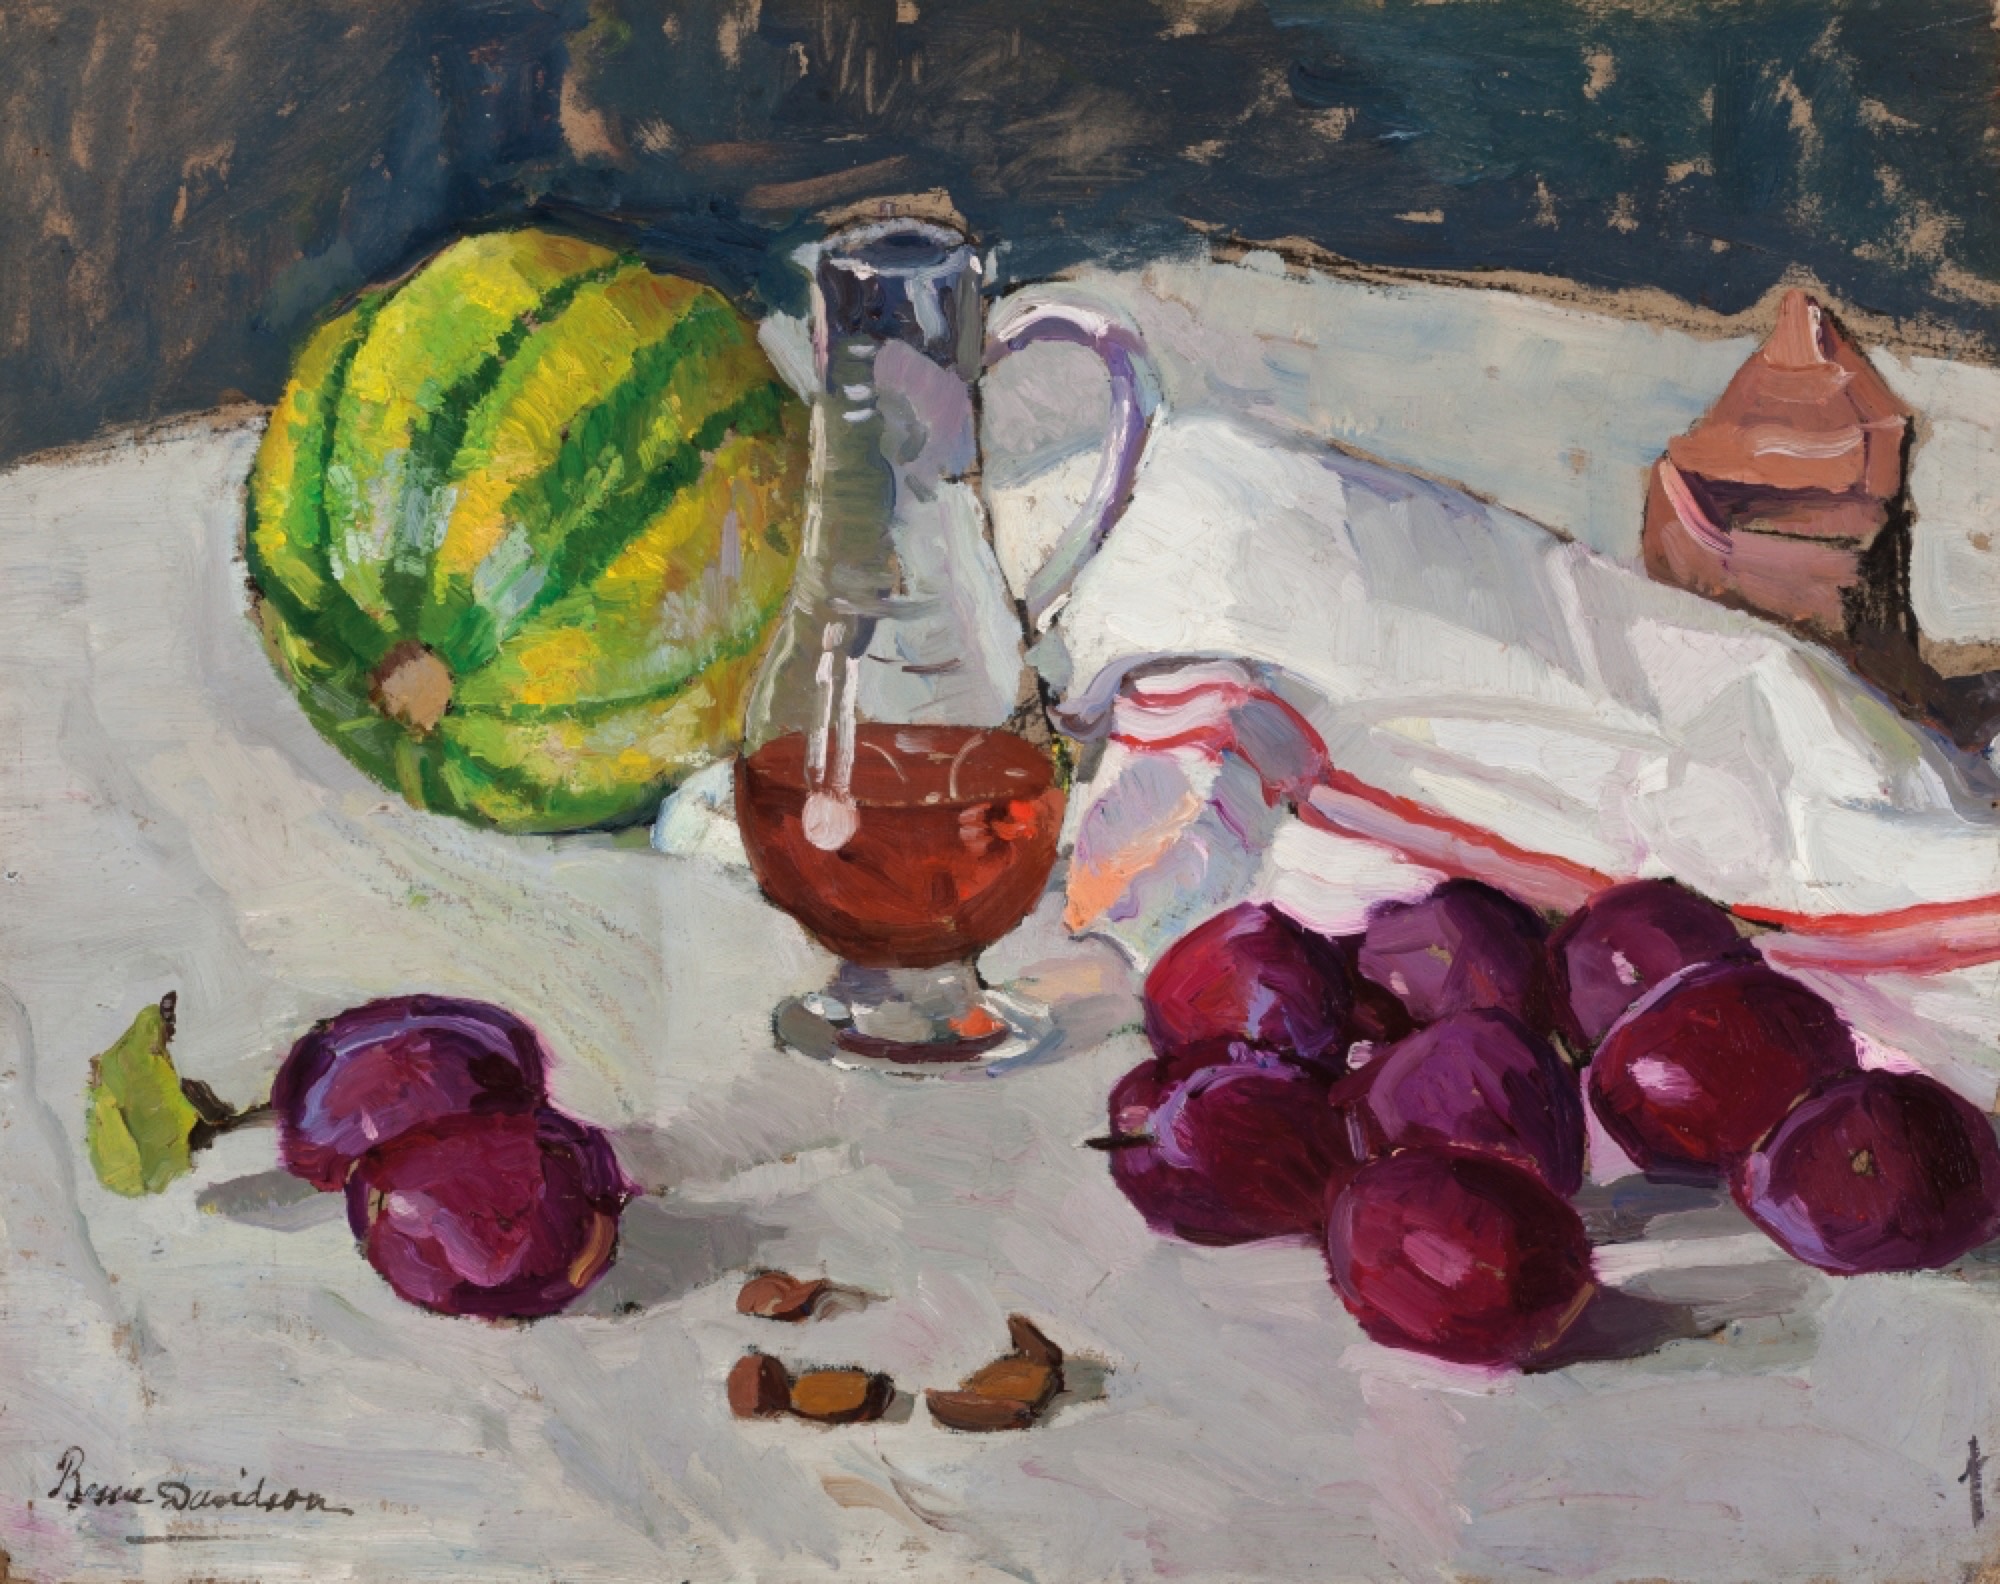 Bessie Davidson, <em>Still life with fruits and a carafe</em>, 1930s, oil on card, 37 x 46 cm, private collection, Queensland.